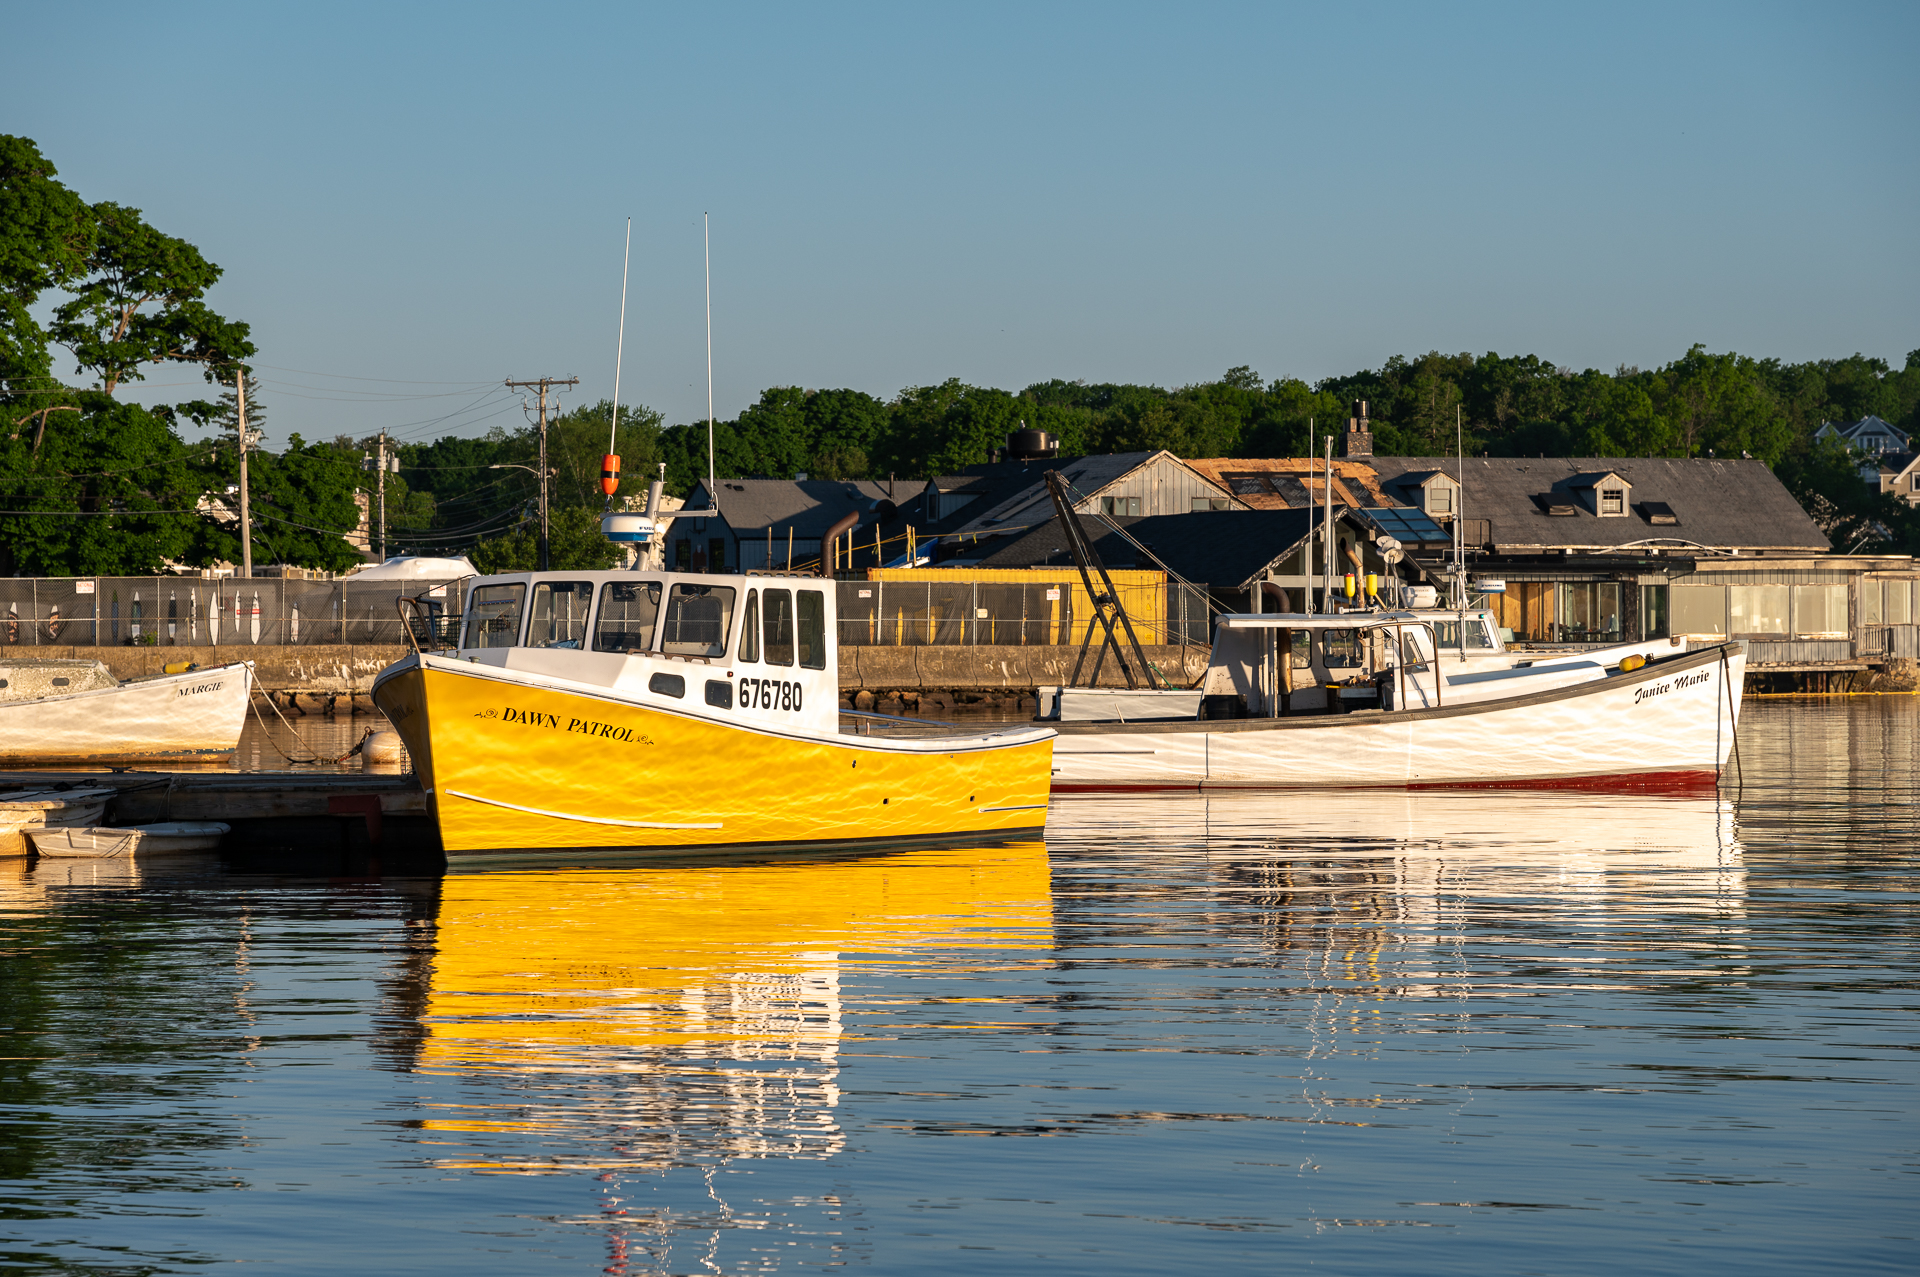 A Commercial Fishing Vessel named Dawn Patrol.